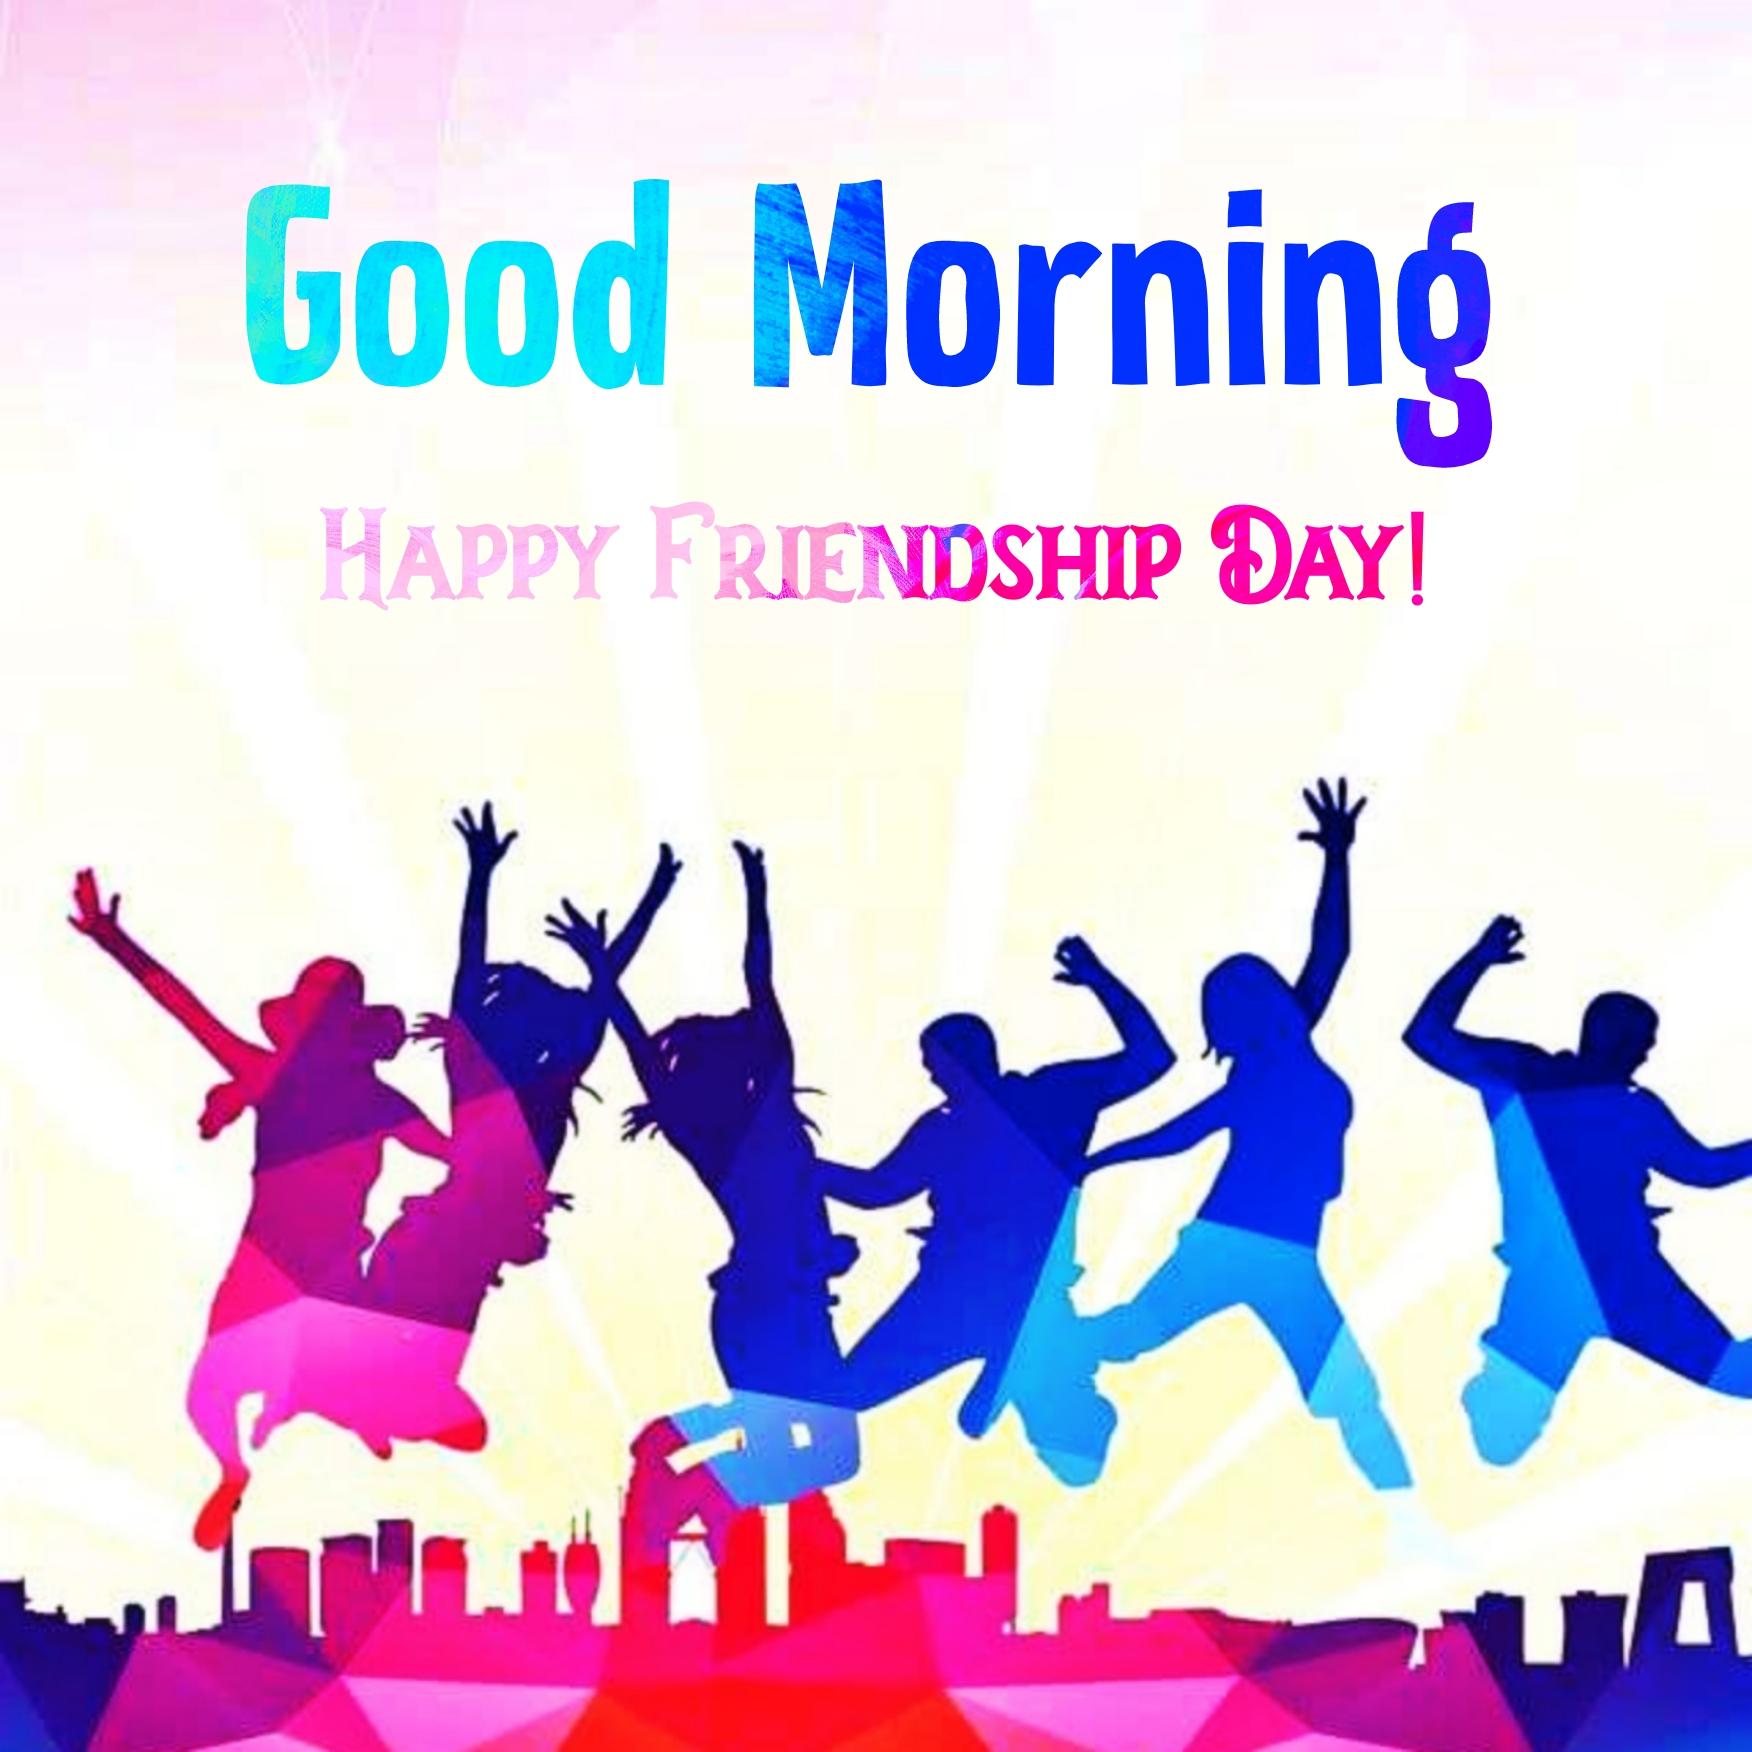 Good Morning Friendship Day Images